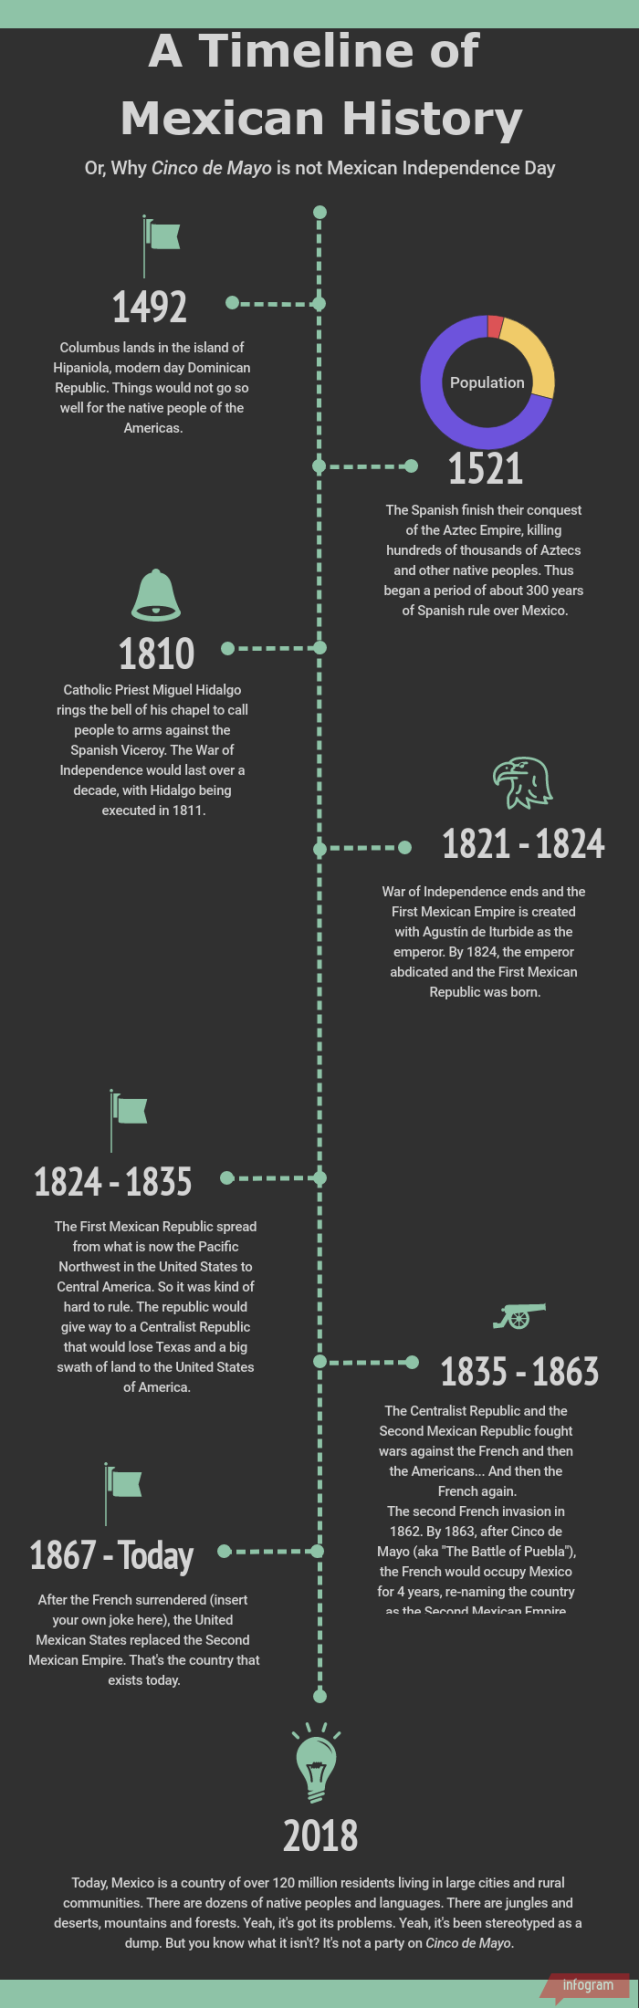 timeline-of-mexican-history